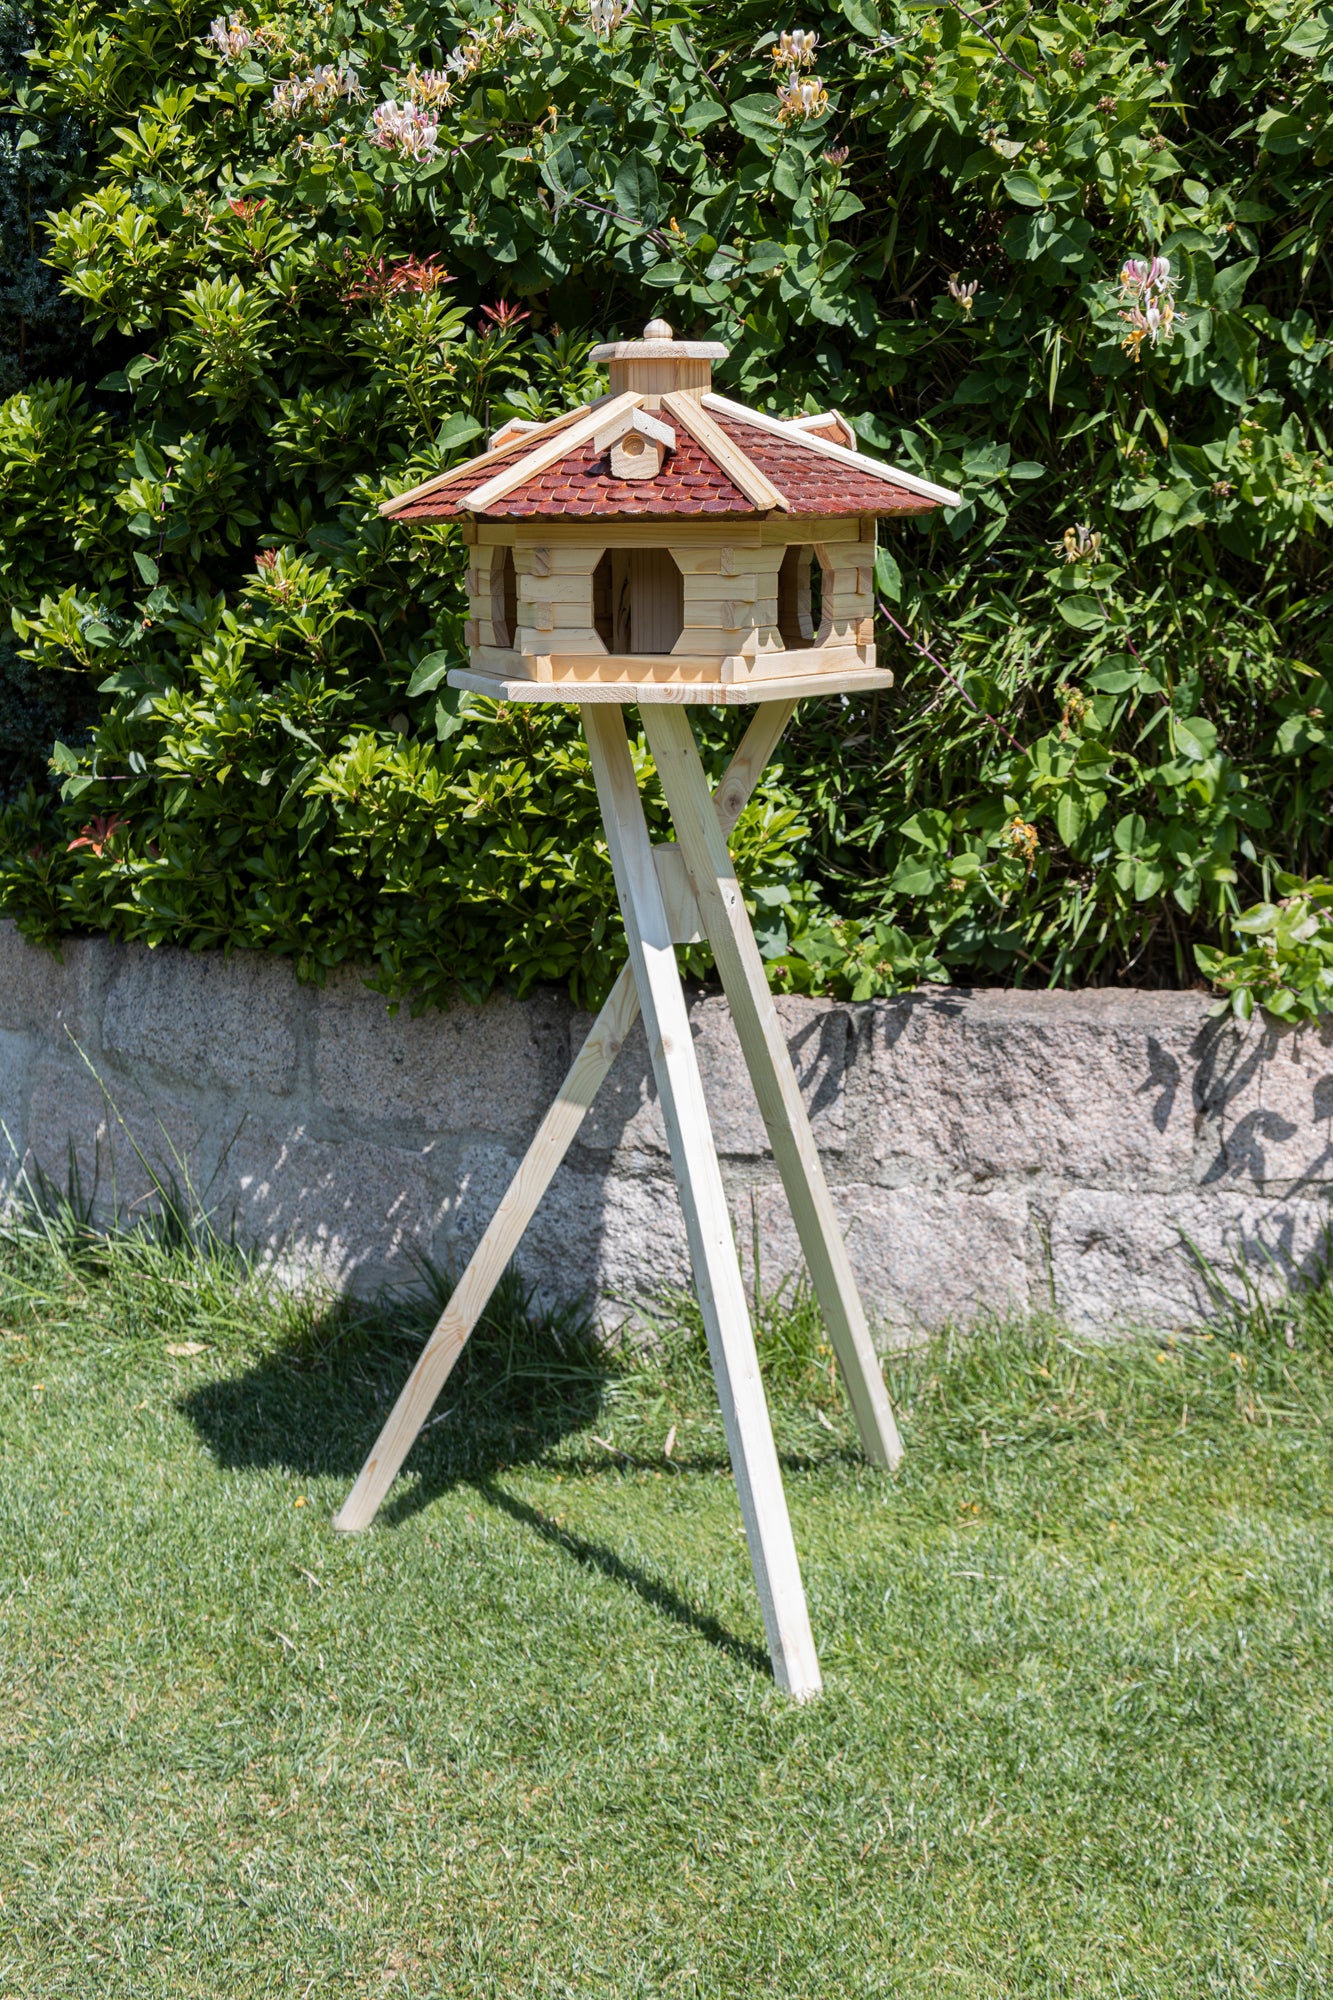 XXL wooden bird house with brown roofing felt shingle roof